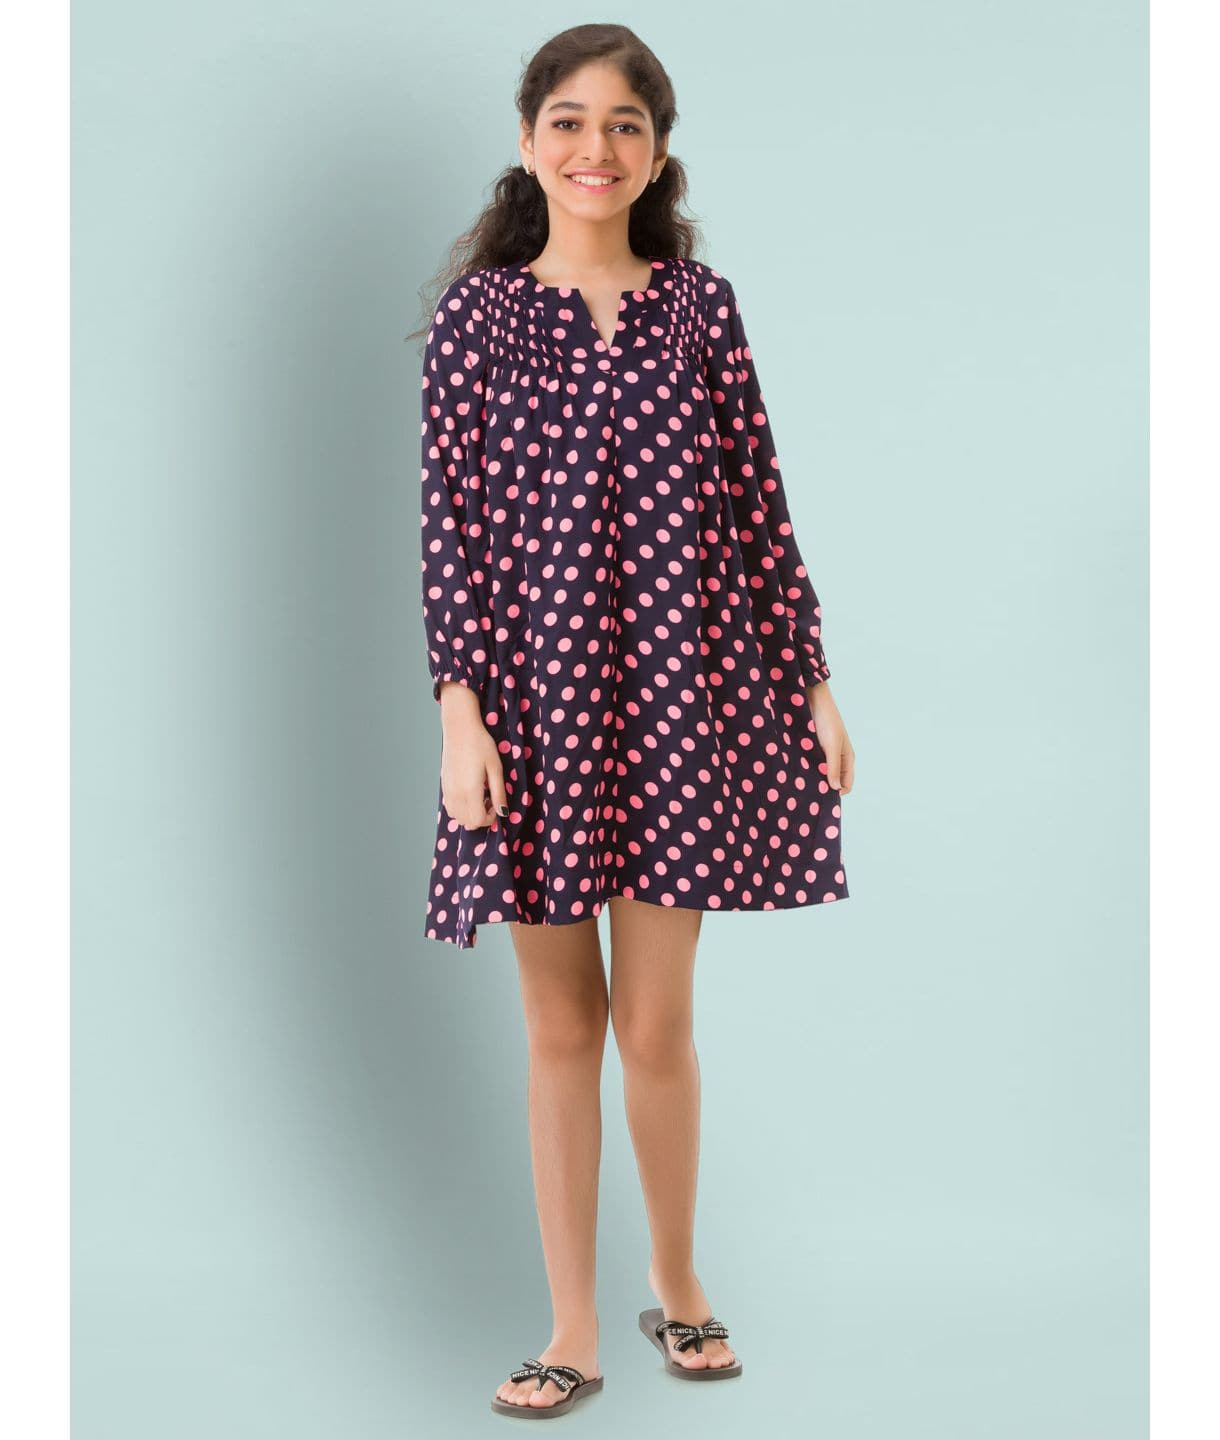 Polka Printed Cotton 3/4th Sleeves Dress for Girls - Uptownie